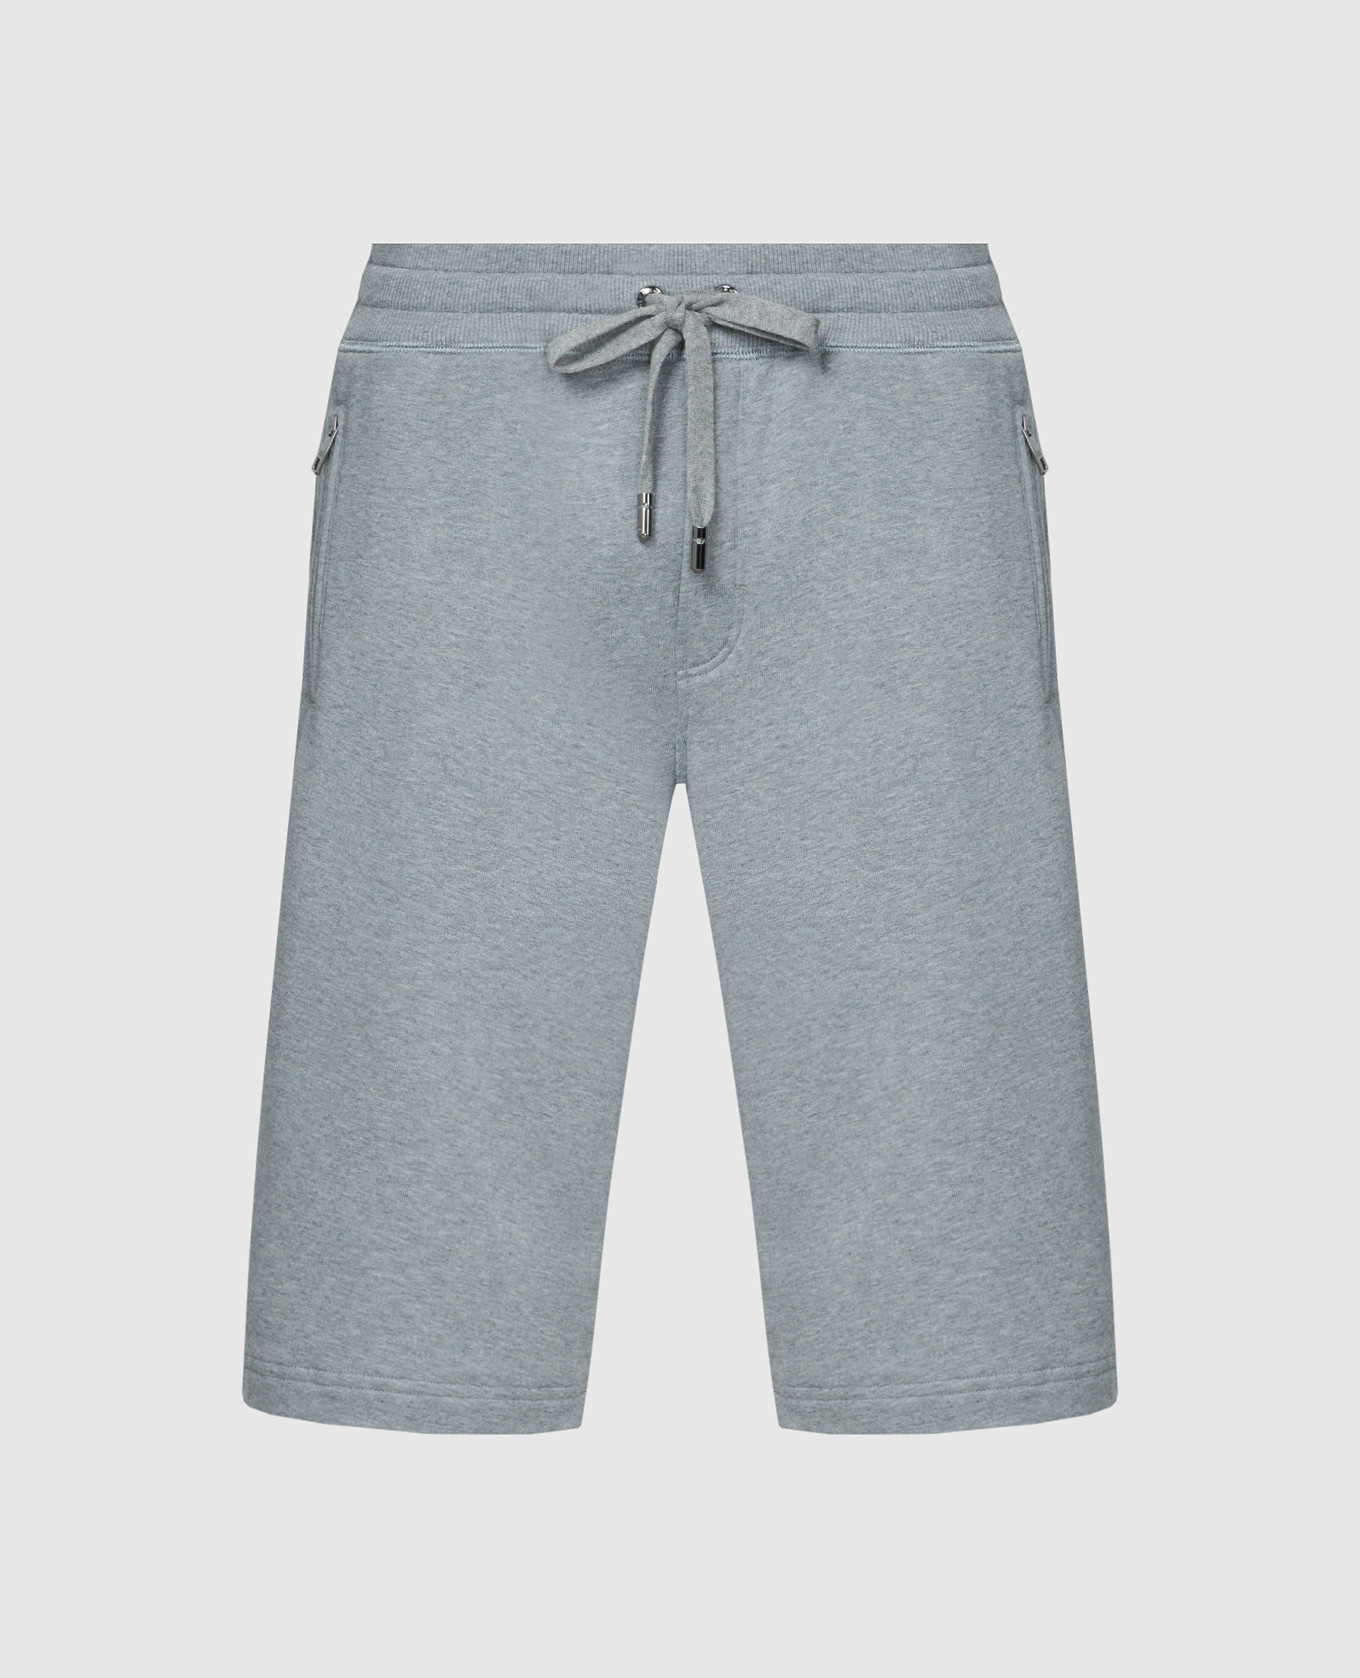 Gray shorts with logo patch